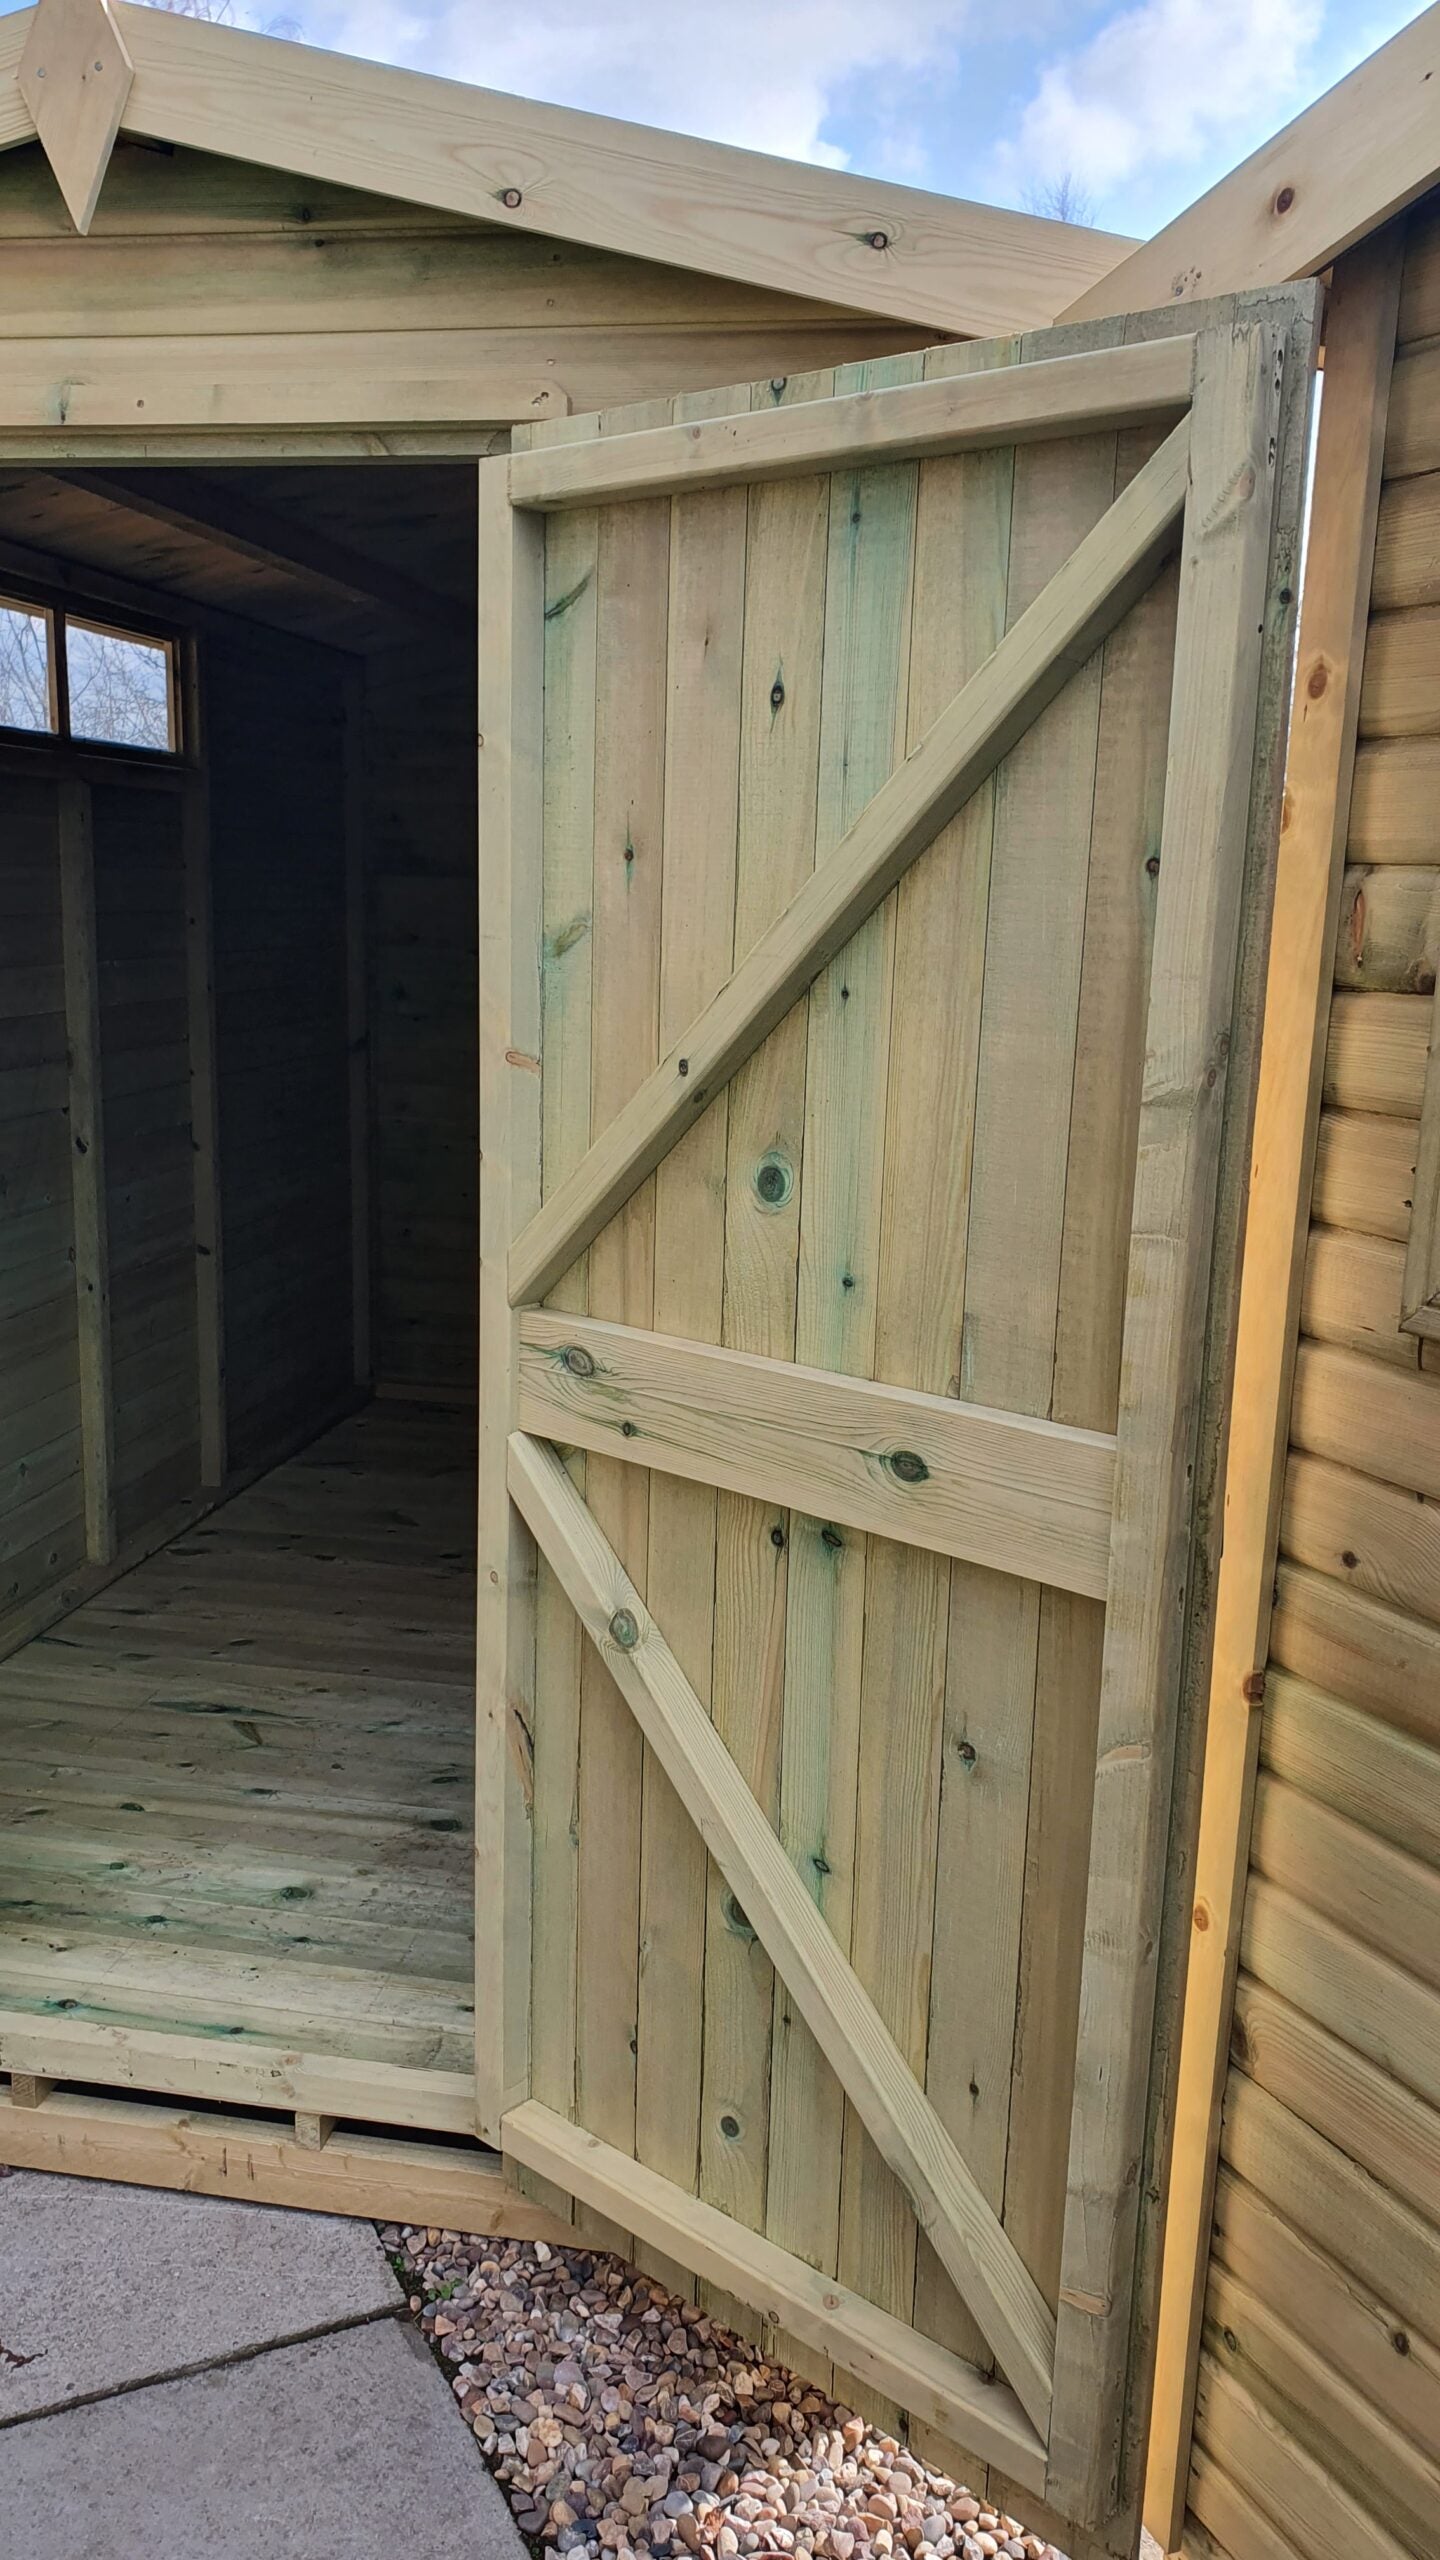 Tanalised Security Shed Keighley Timber & Fencing sheds www.keighleytimbersheds.co.uk